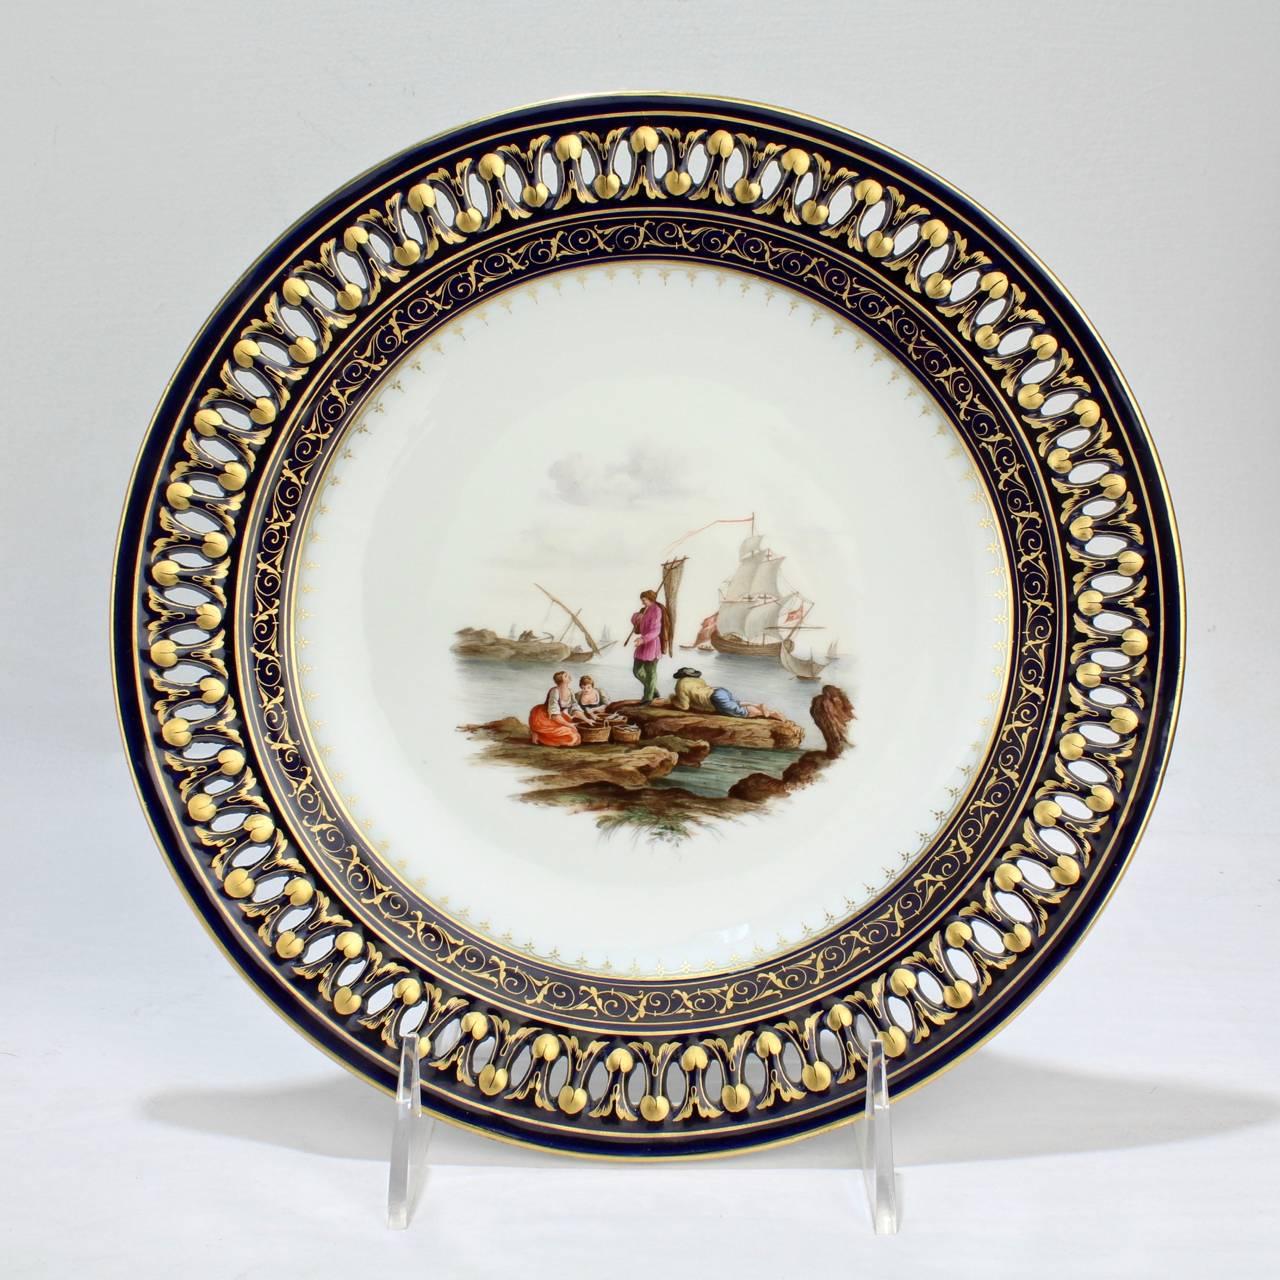 Baroque Revival Pair of Antique Meissen Porcelain Reticulated Cabinet Plates with Cobalt Borders